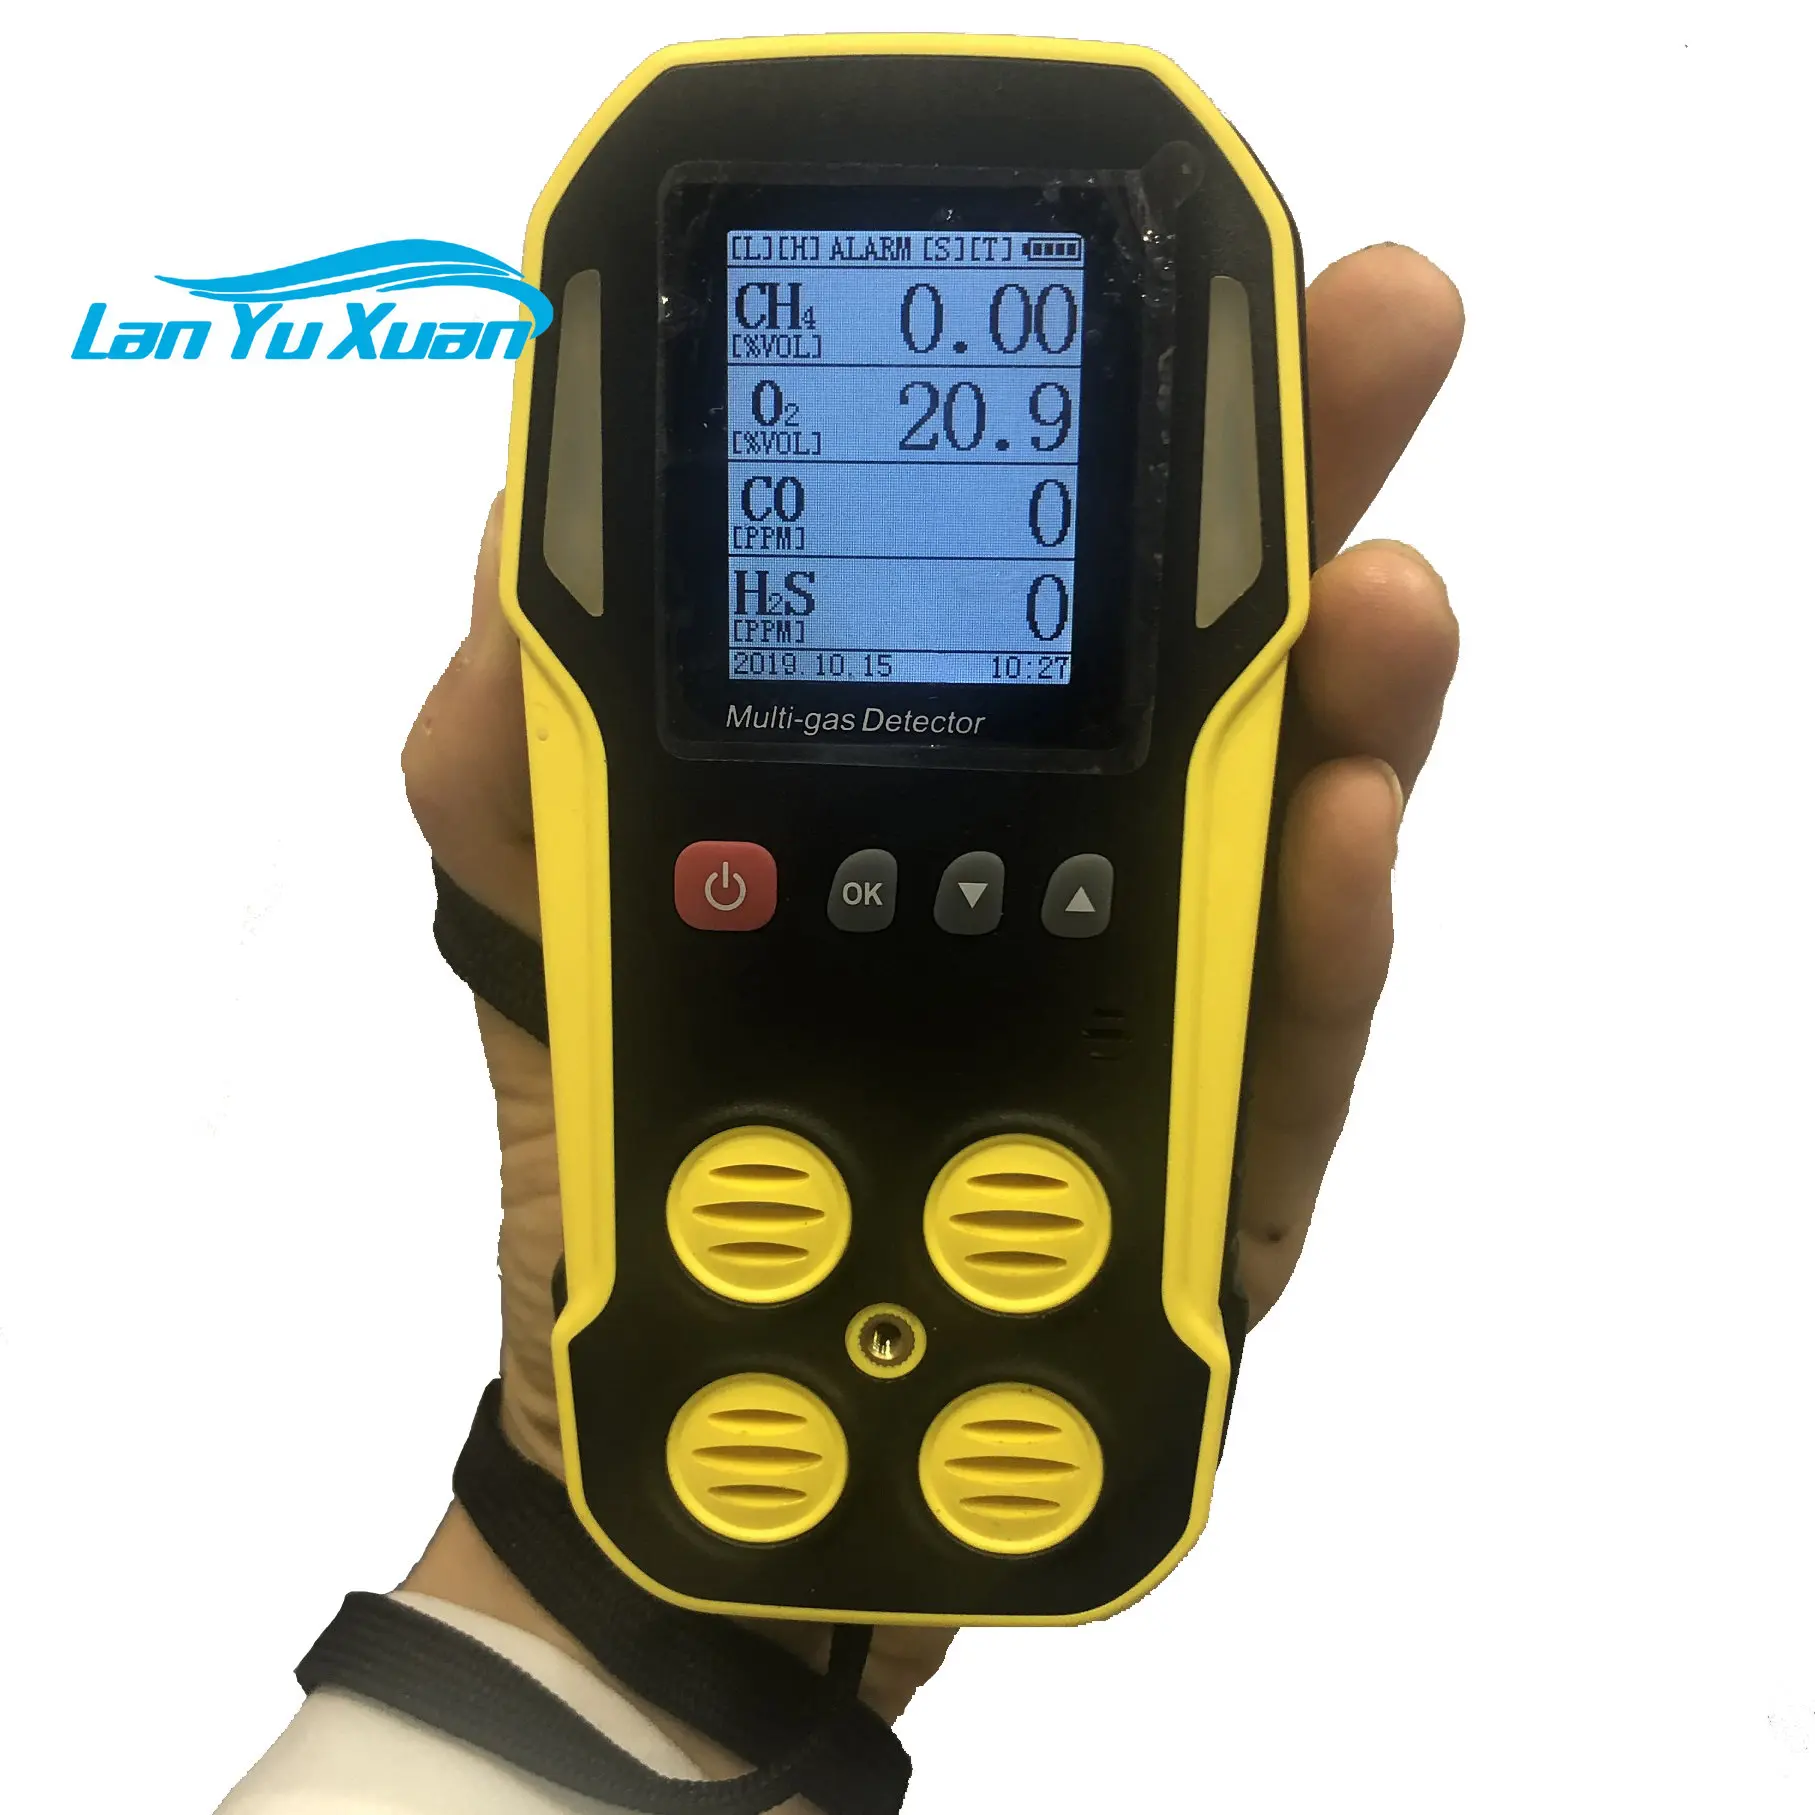 

Portable Industrial Multi 4 Gas Detector Analyzer Alarm For CO H2S O2 CH4 Combustible Gas